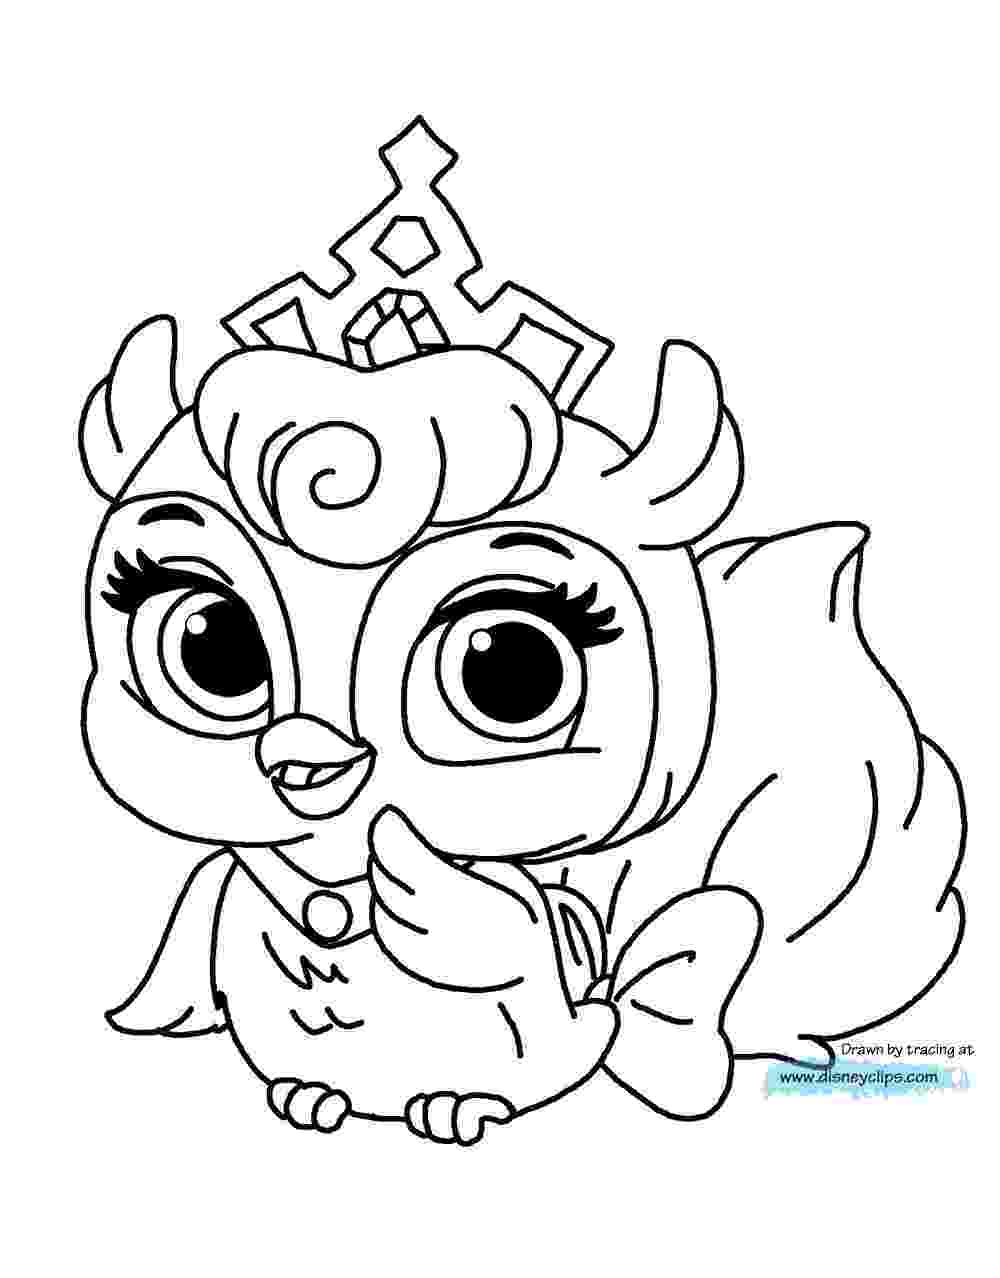 princess puppy coloring pages 17 best images about disney39s little mermaid malesider on princess pages coloring puppy 